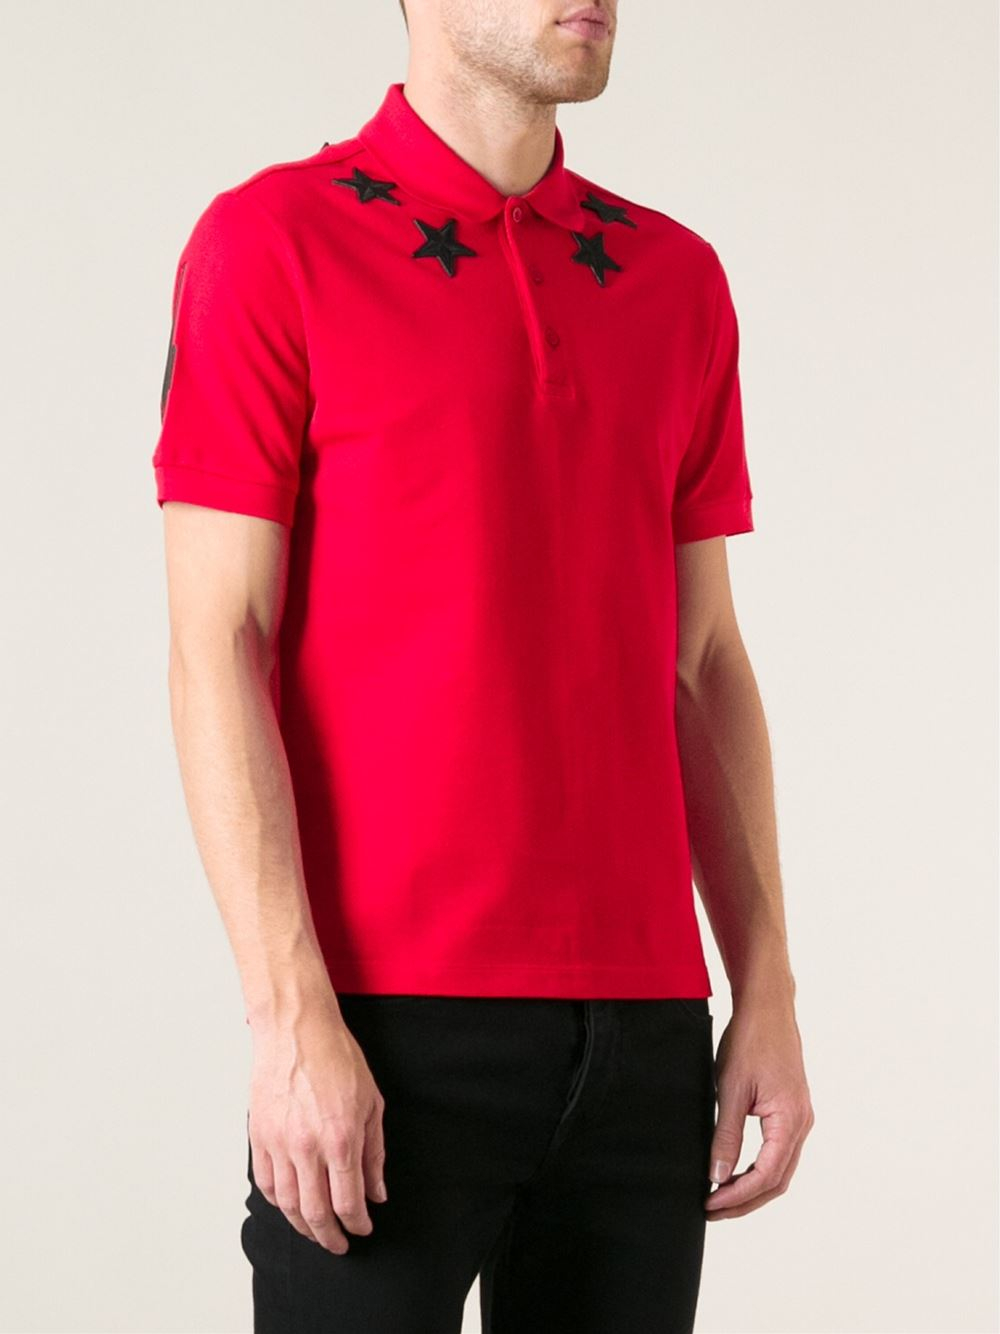 Givenchy Polo Shirt in Red for Men - Lyst